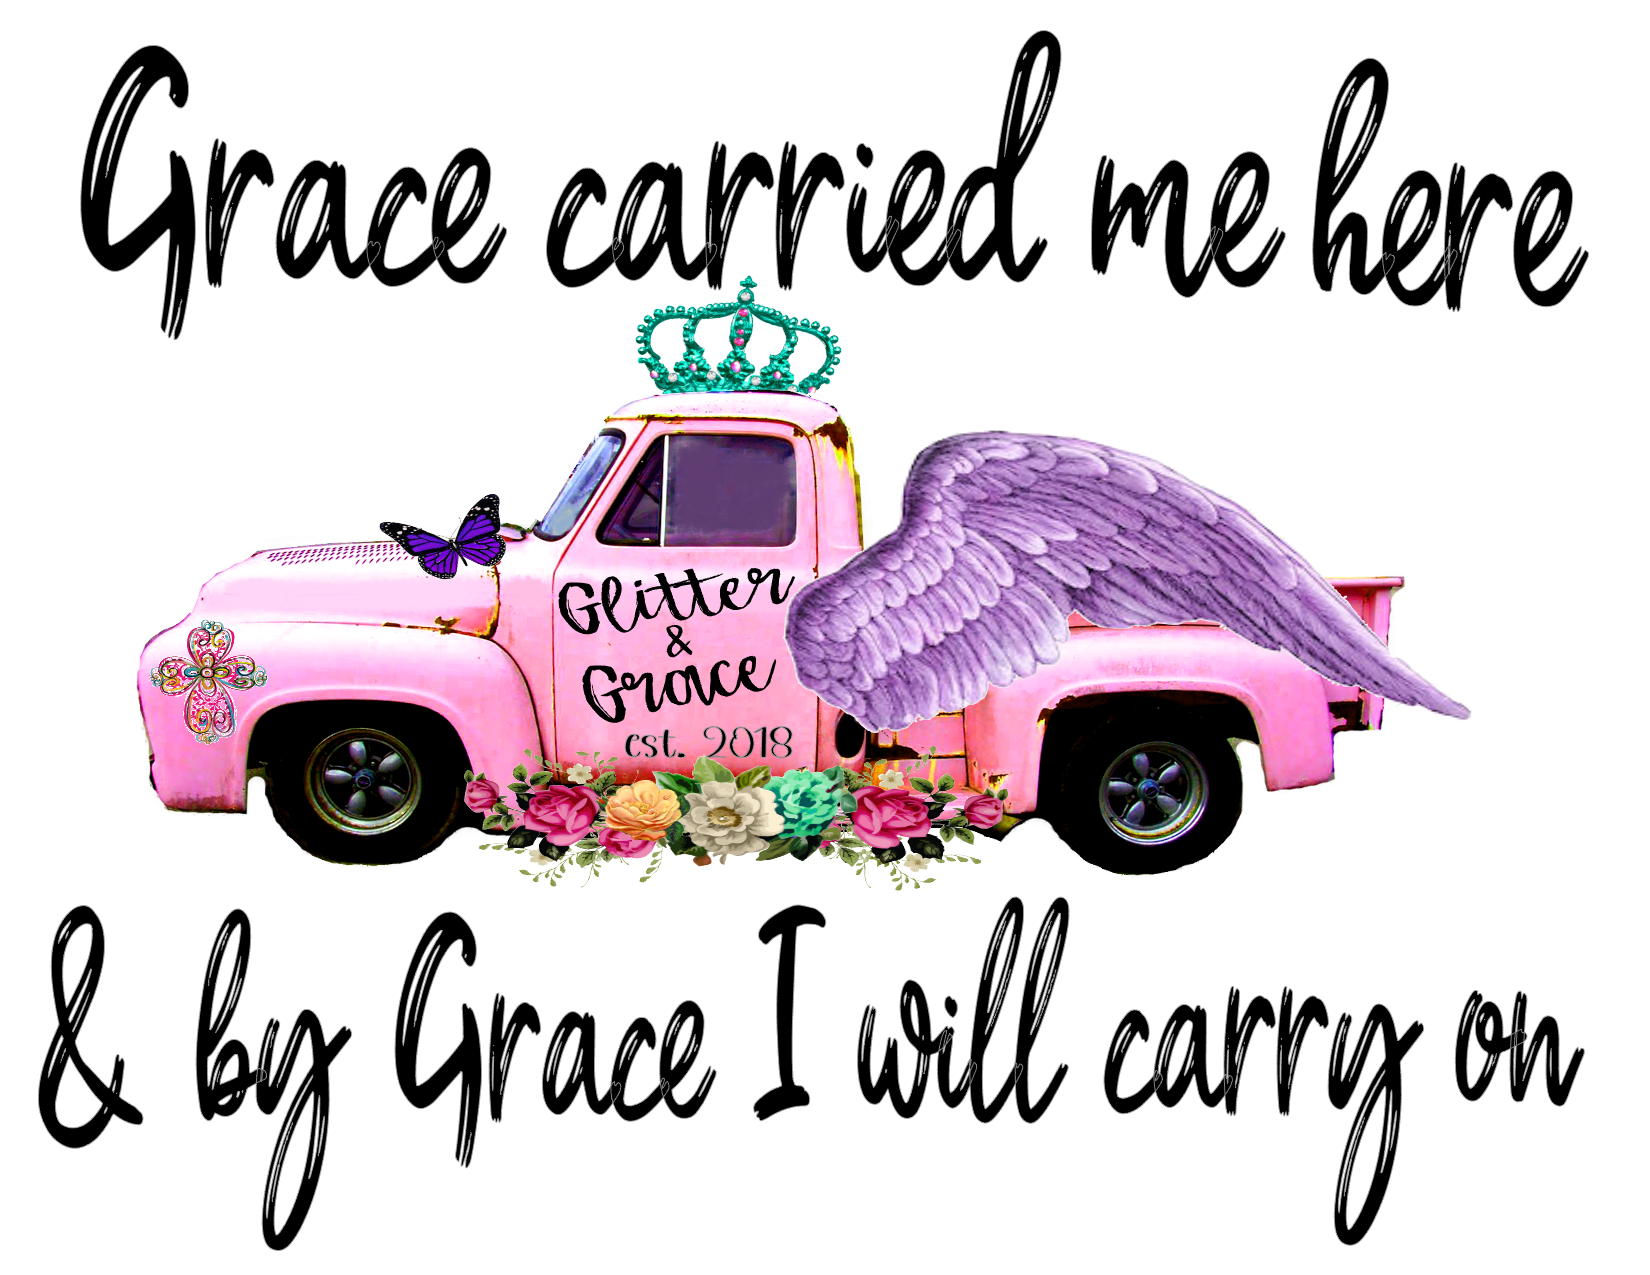 #314 Grace carried me here & by Grace I will carry on